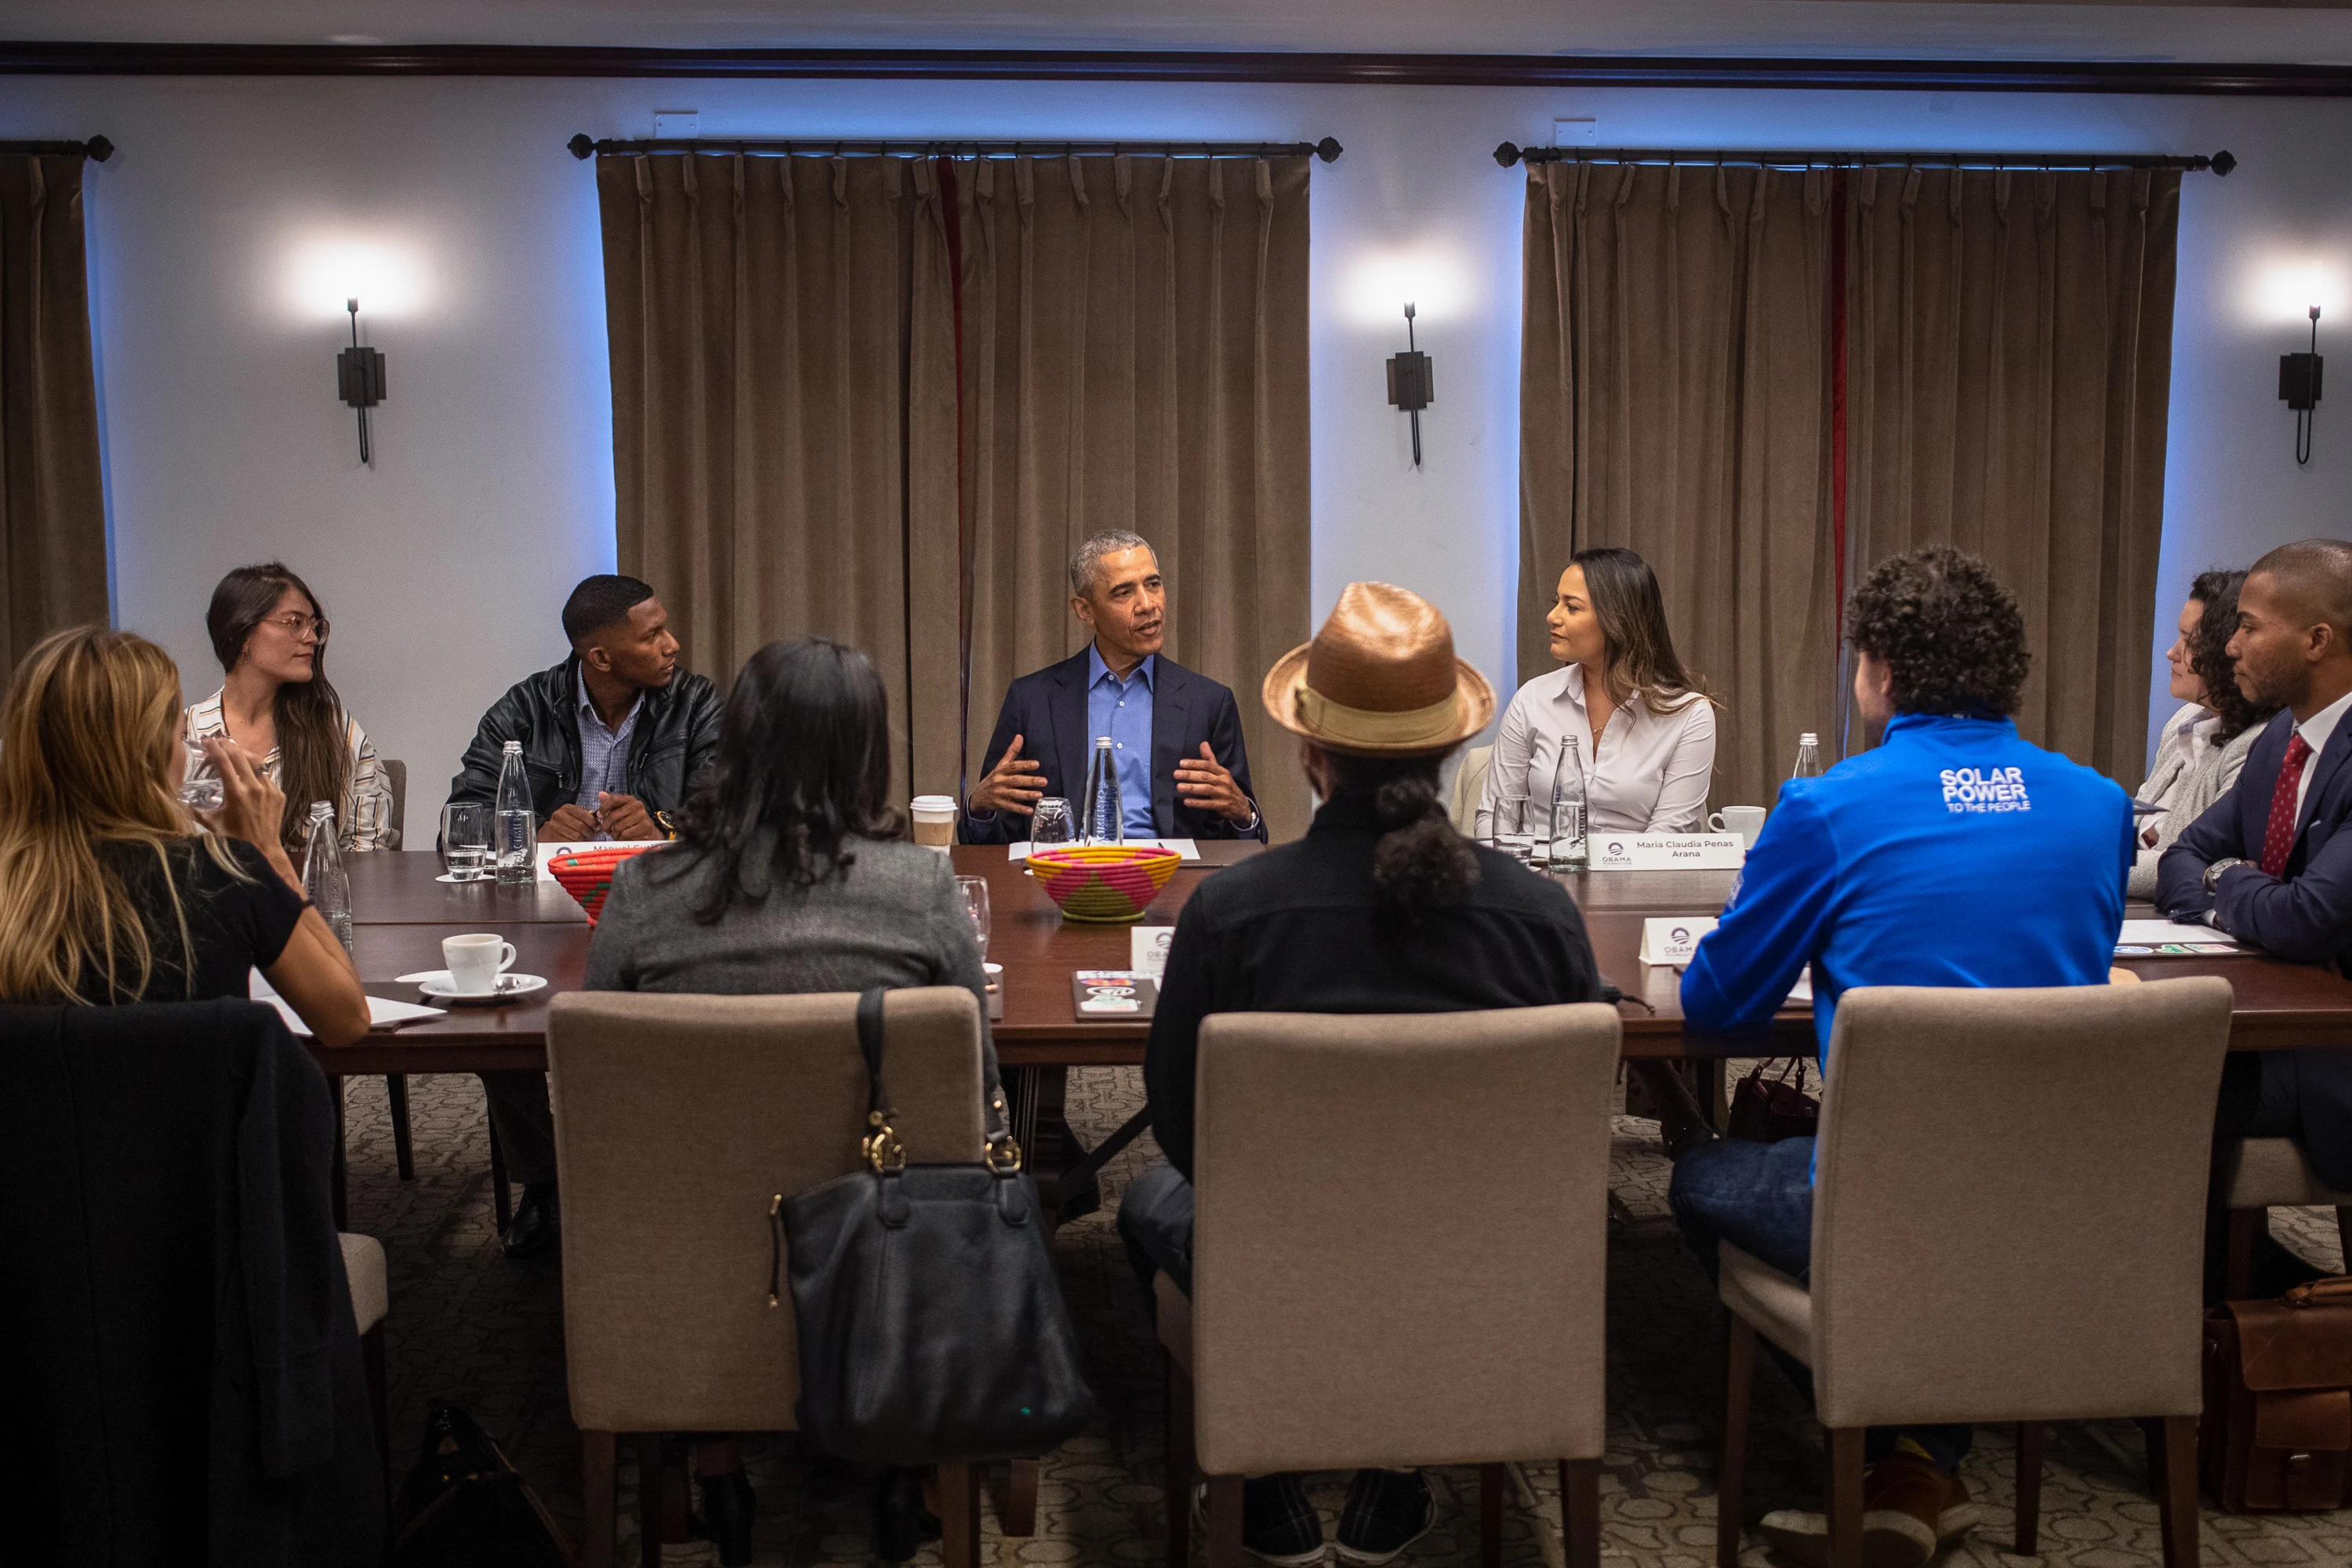 President Obama participates in a roundtable discussion with young leaders in Bogota, Colombia on May 29, 2019. Bogota, Colombia. Credit: The Obama Foundation

Please credit "The Obama Foundation" when posting. The photographs may not be manipulated in any